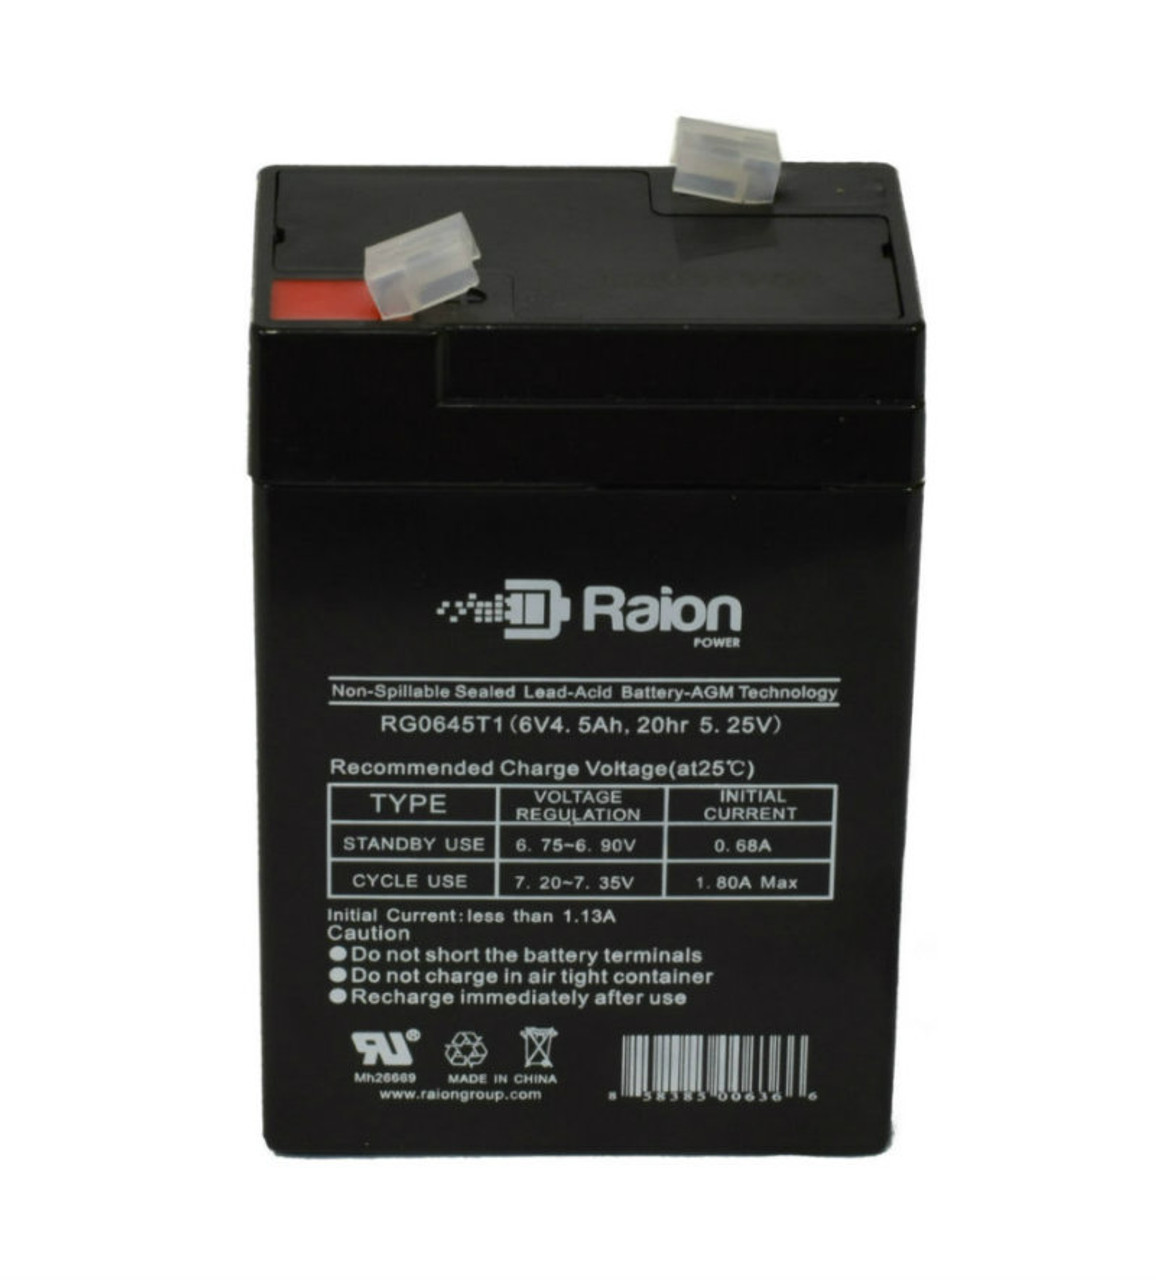 Raion Power RG0645T1 Replacement Battery Cartridge for Costzon 6V Ride On Car, RC Parental Remote Control & Foot Pedal